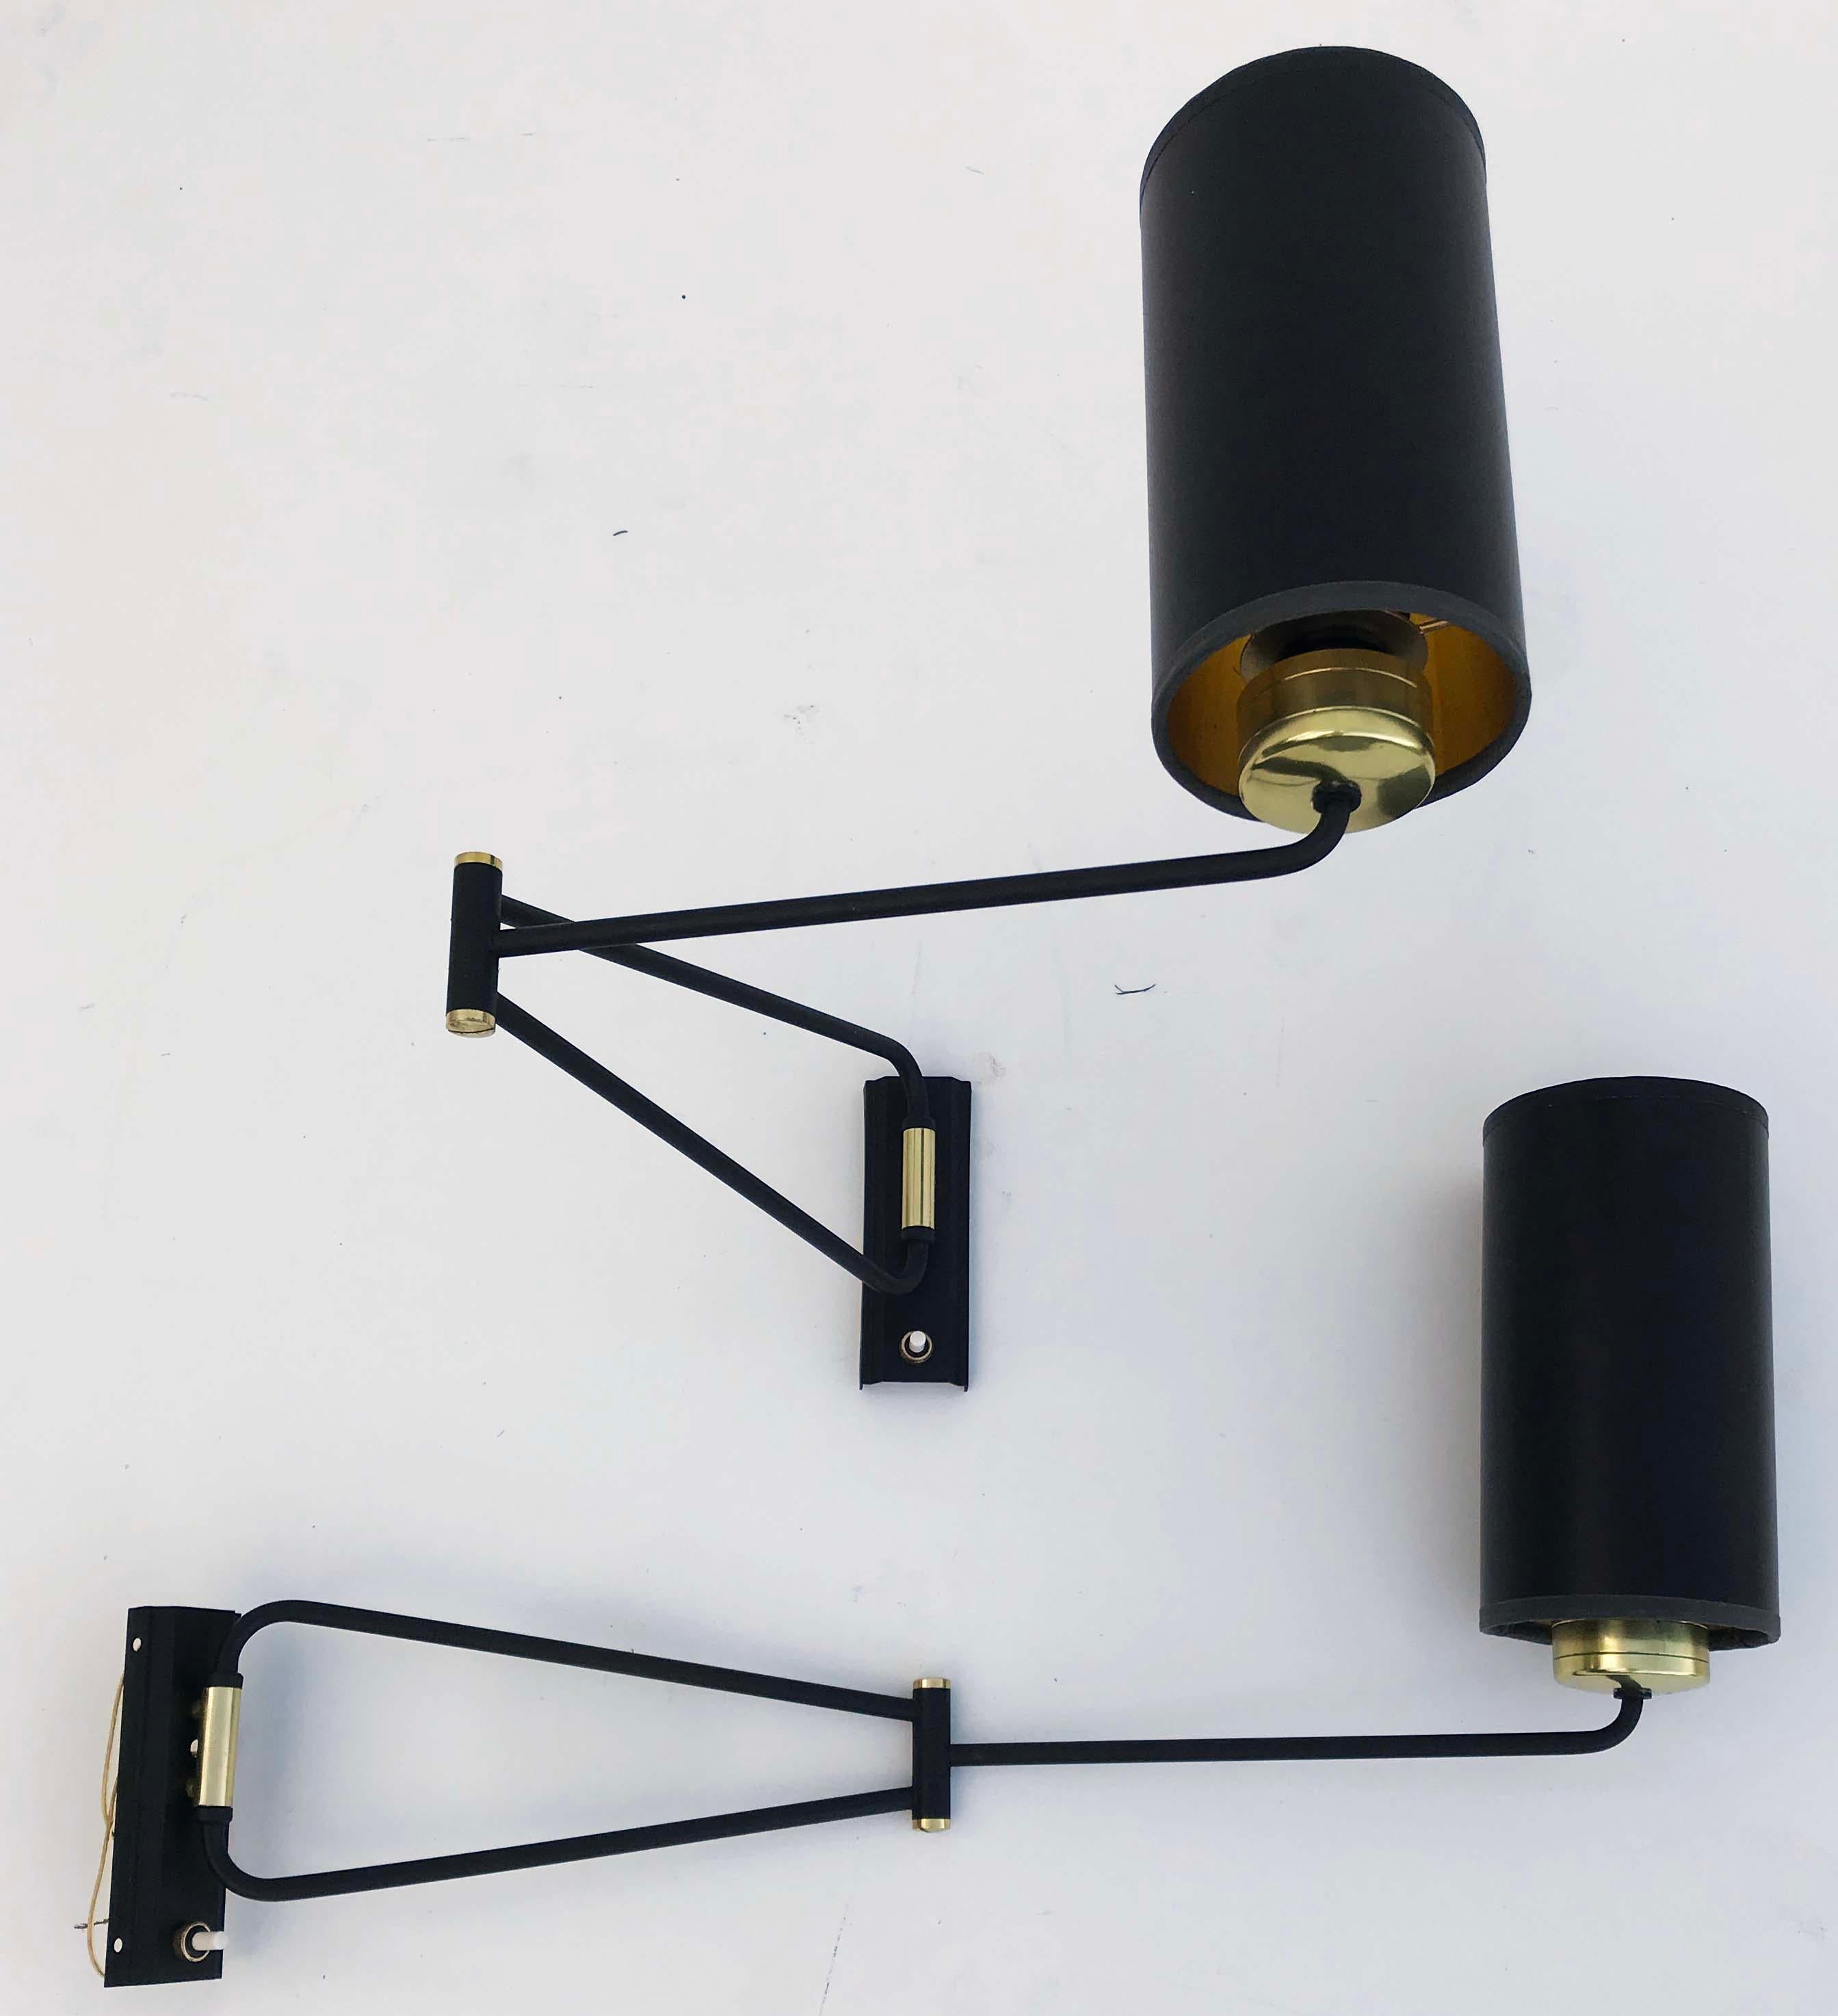 Superb pair of swing arm sconces by Rene Mathieu, adjustable sconces.
US rewired and in working condition
Totally restored and refinished
1 light, 40 watts max bulb.
Custom backplate available 
Measurements: 11